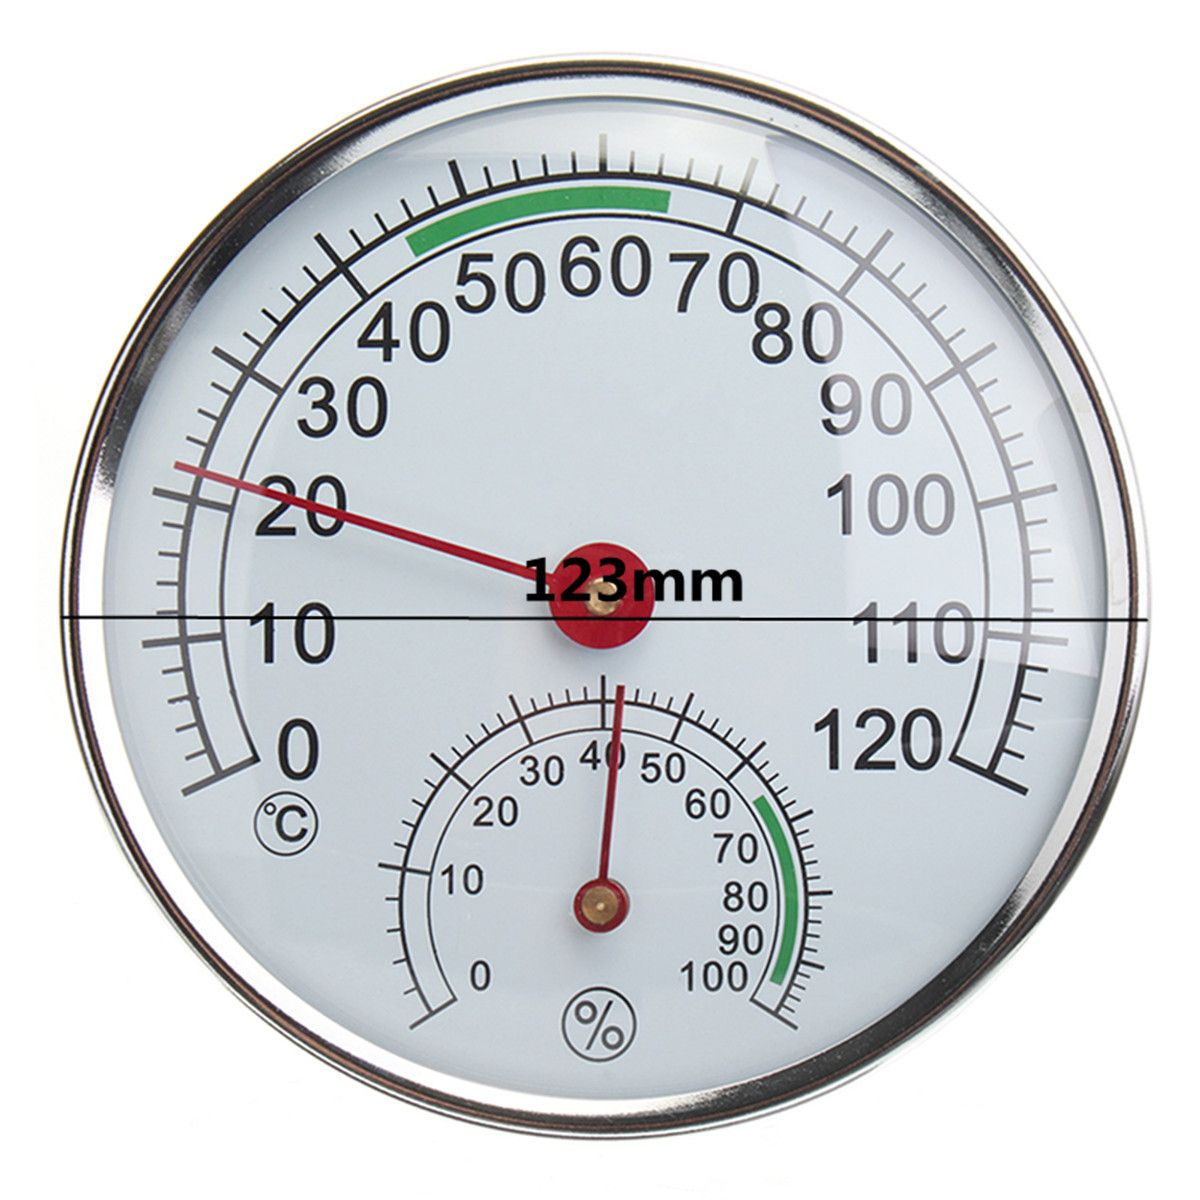 Stainless-Steel-ThermometerHygrometer-for-Sauna-Room-Temperature-Humidity-Meter-1279162